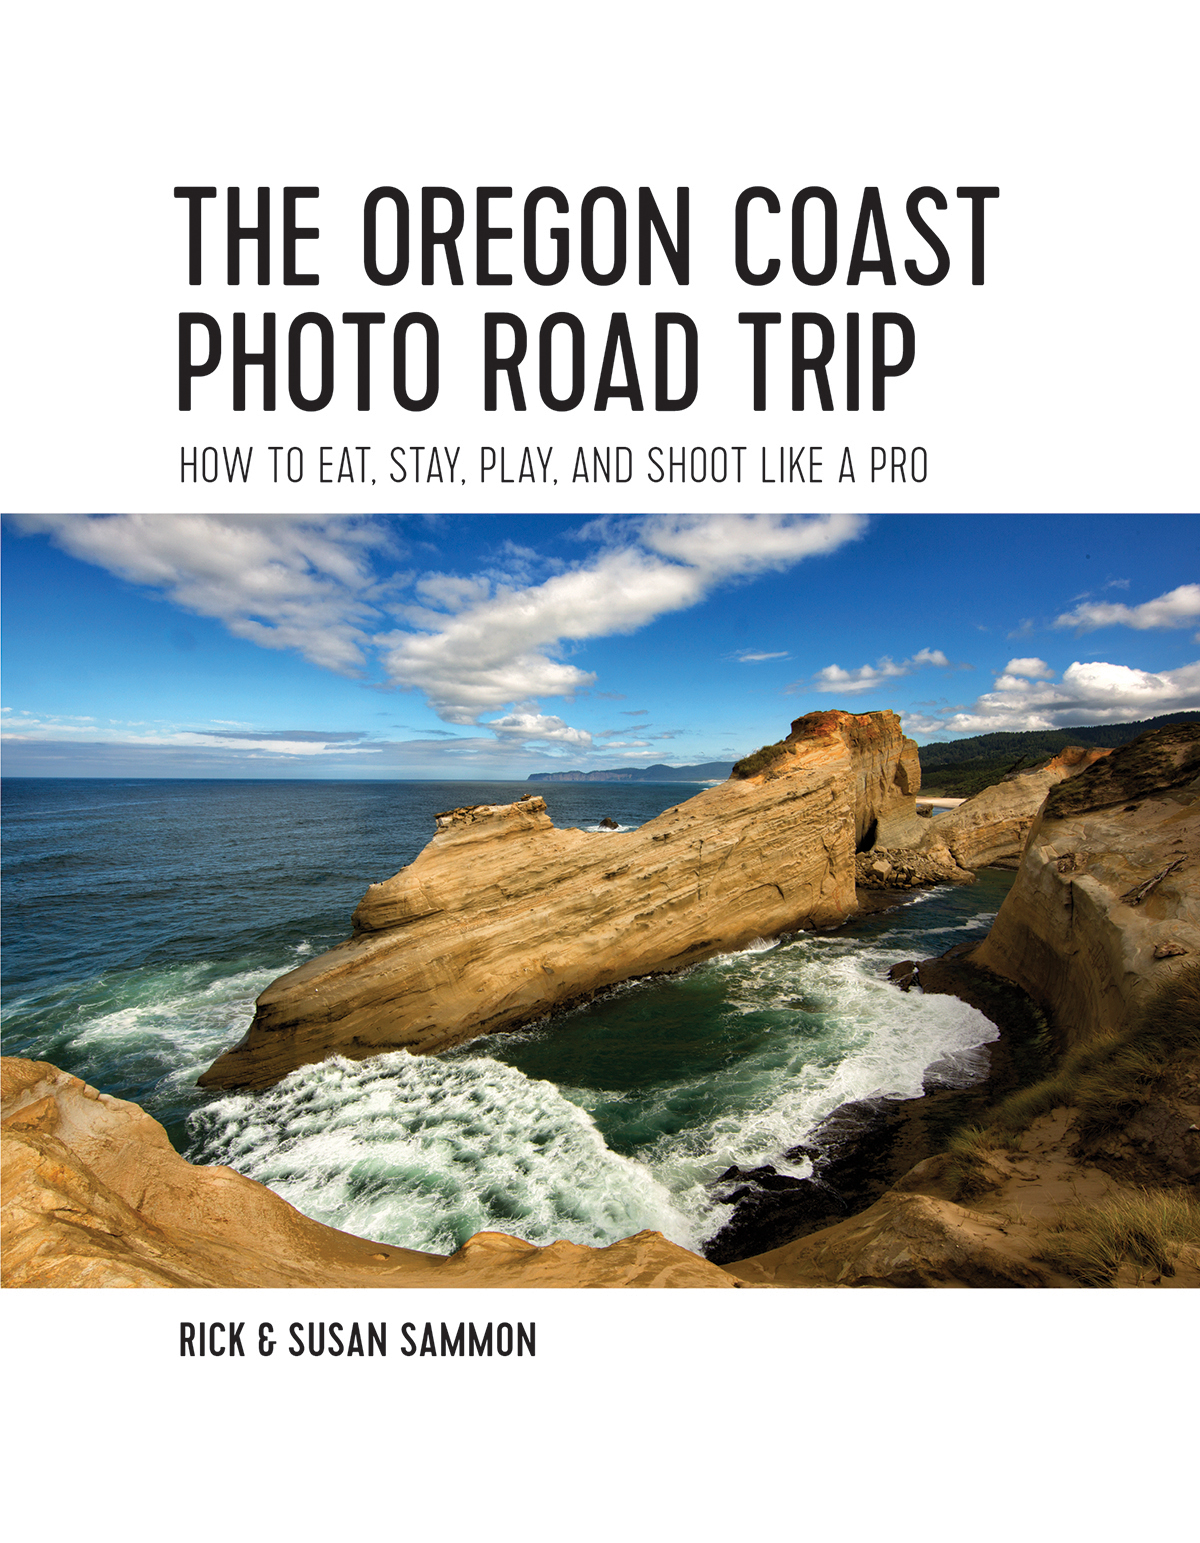 THE OREGON COAST PHOTO ROAD TRIP HOW TO EAT STAY PLAY AND SHOOT LIKE A PRO - photo 1